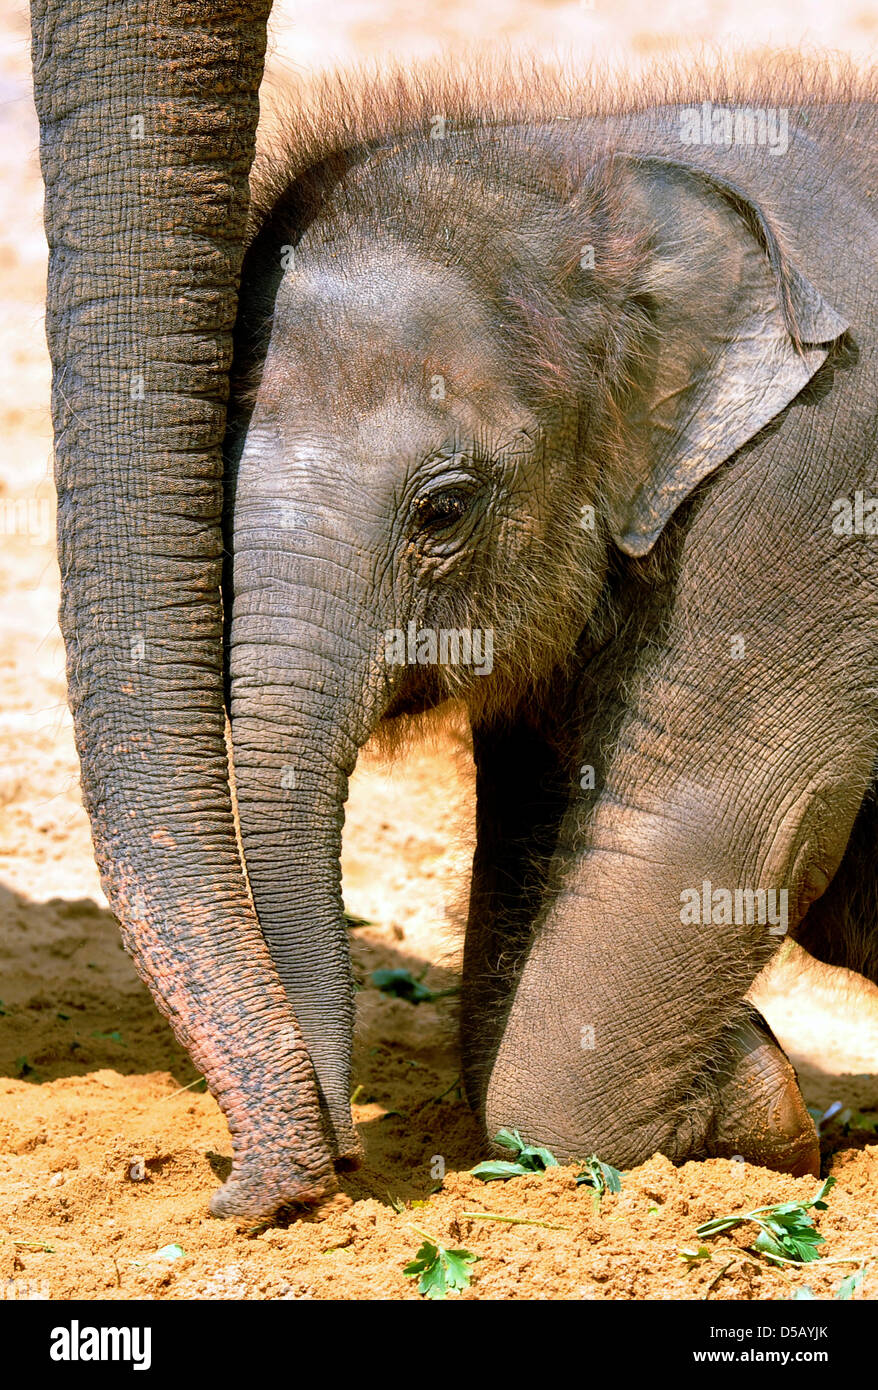 Protected by its mother Califa, the yet unnamed new baby elephant explores the grounds at the zoo in Hanover, Germany, 27 July 2010. It is the third baby elephant after Saphira (born 07 May 2010) and Nuka (born 11 May 2010) this year at the zoo. Photo: JOCHEN LUEBKE Stock Photo